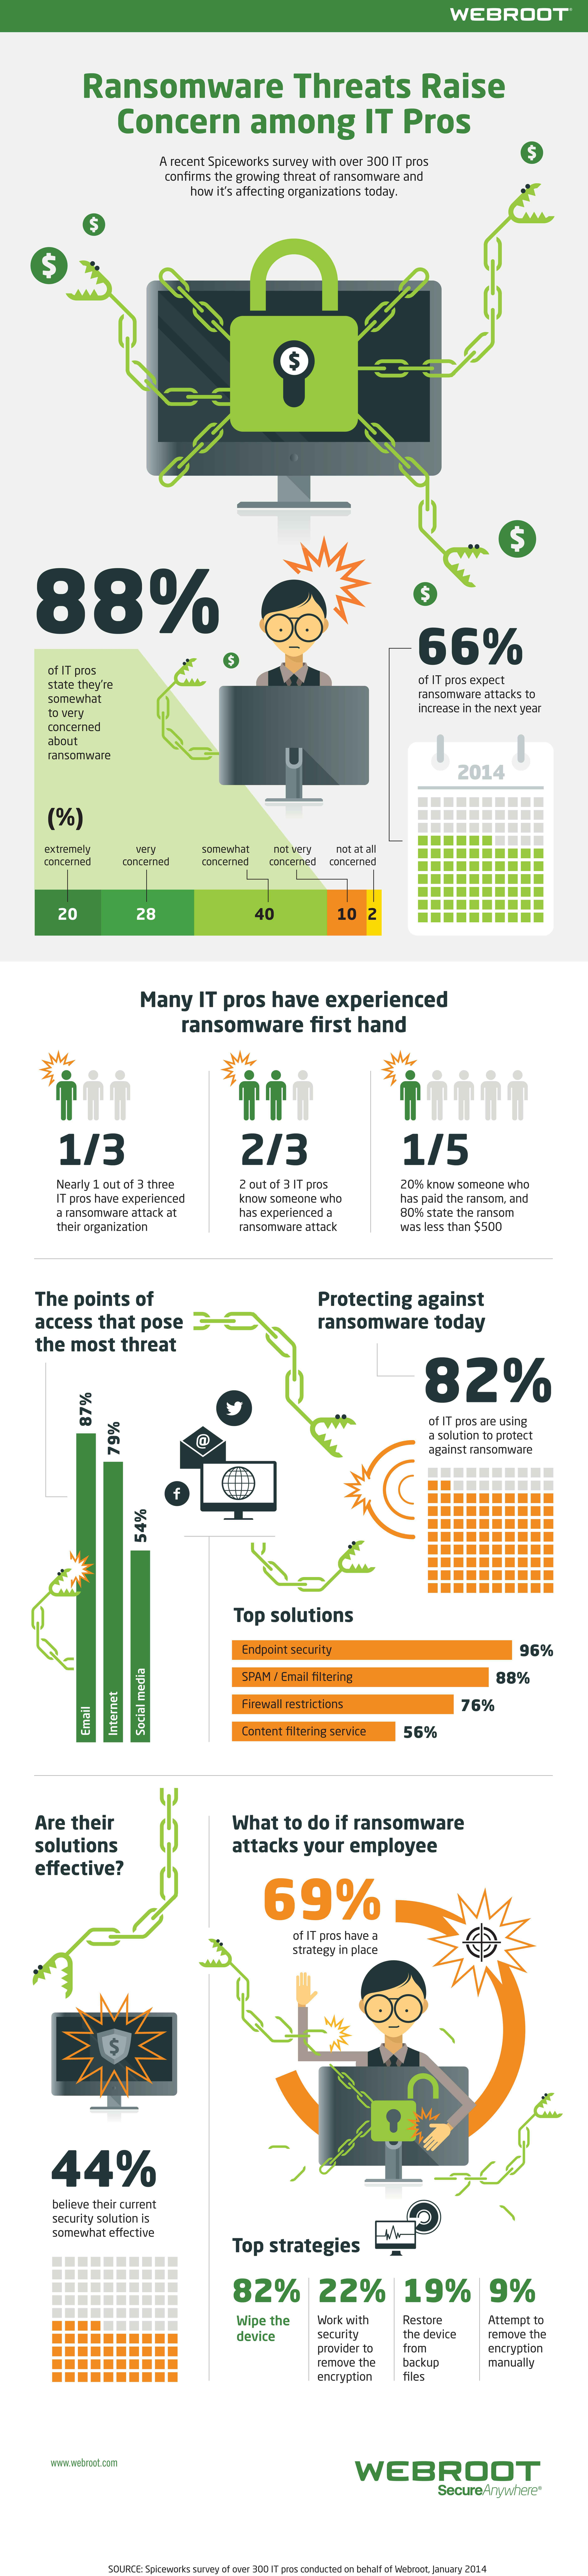 Ransomware threats - infographic